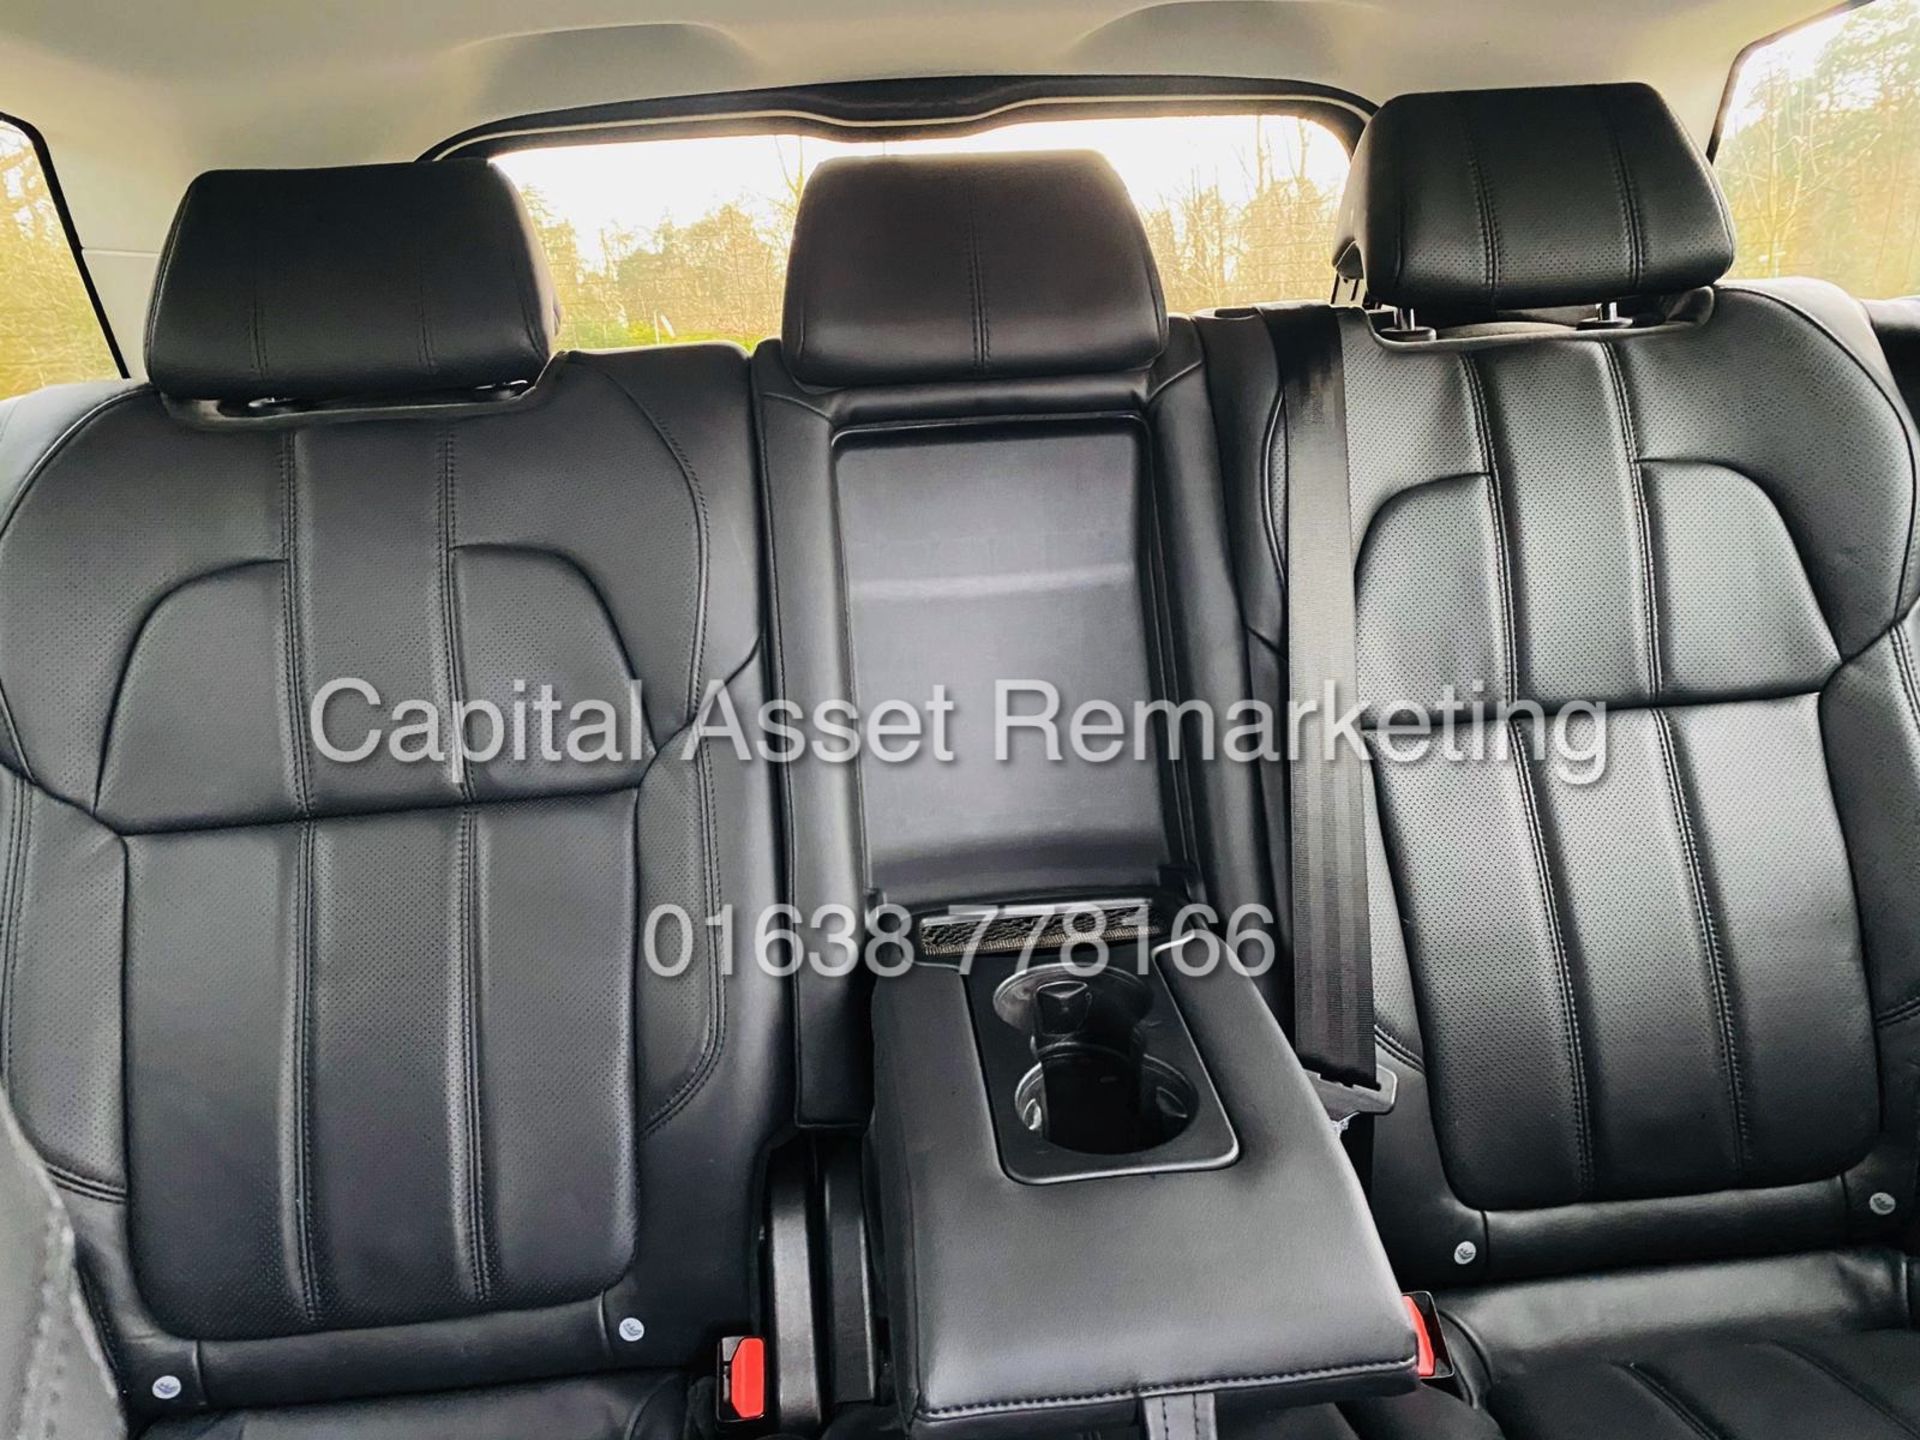 On Sale RANGE ROVER SPORT *HSE Dynamic* SUV (2017) '3.0 SDV6 - 306 BHP - 8 SPEED AUTO' FULLY LOADED - Image 24 of 34